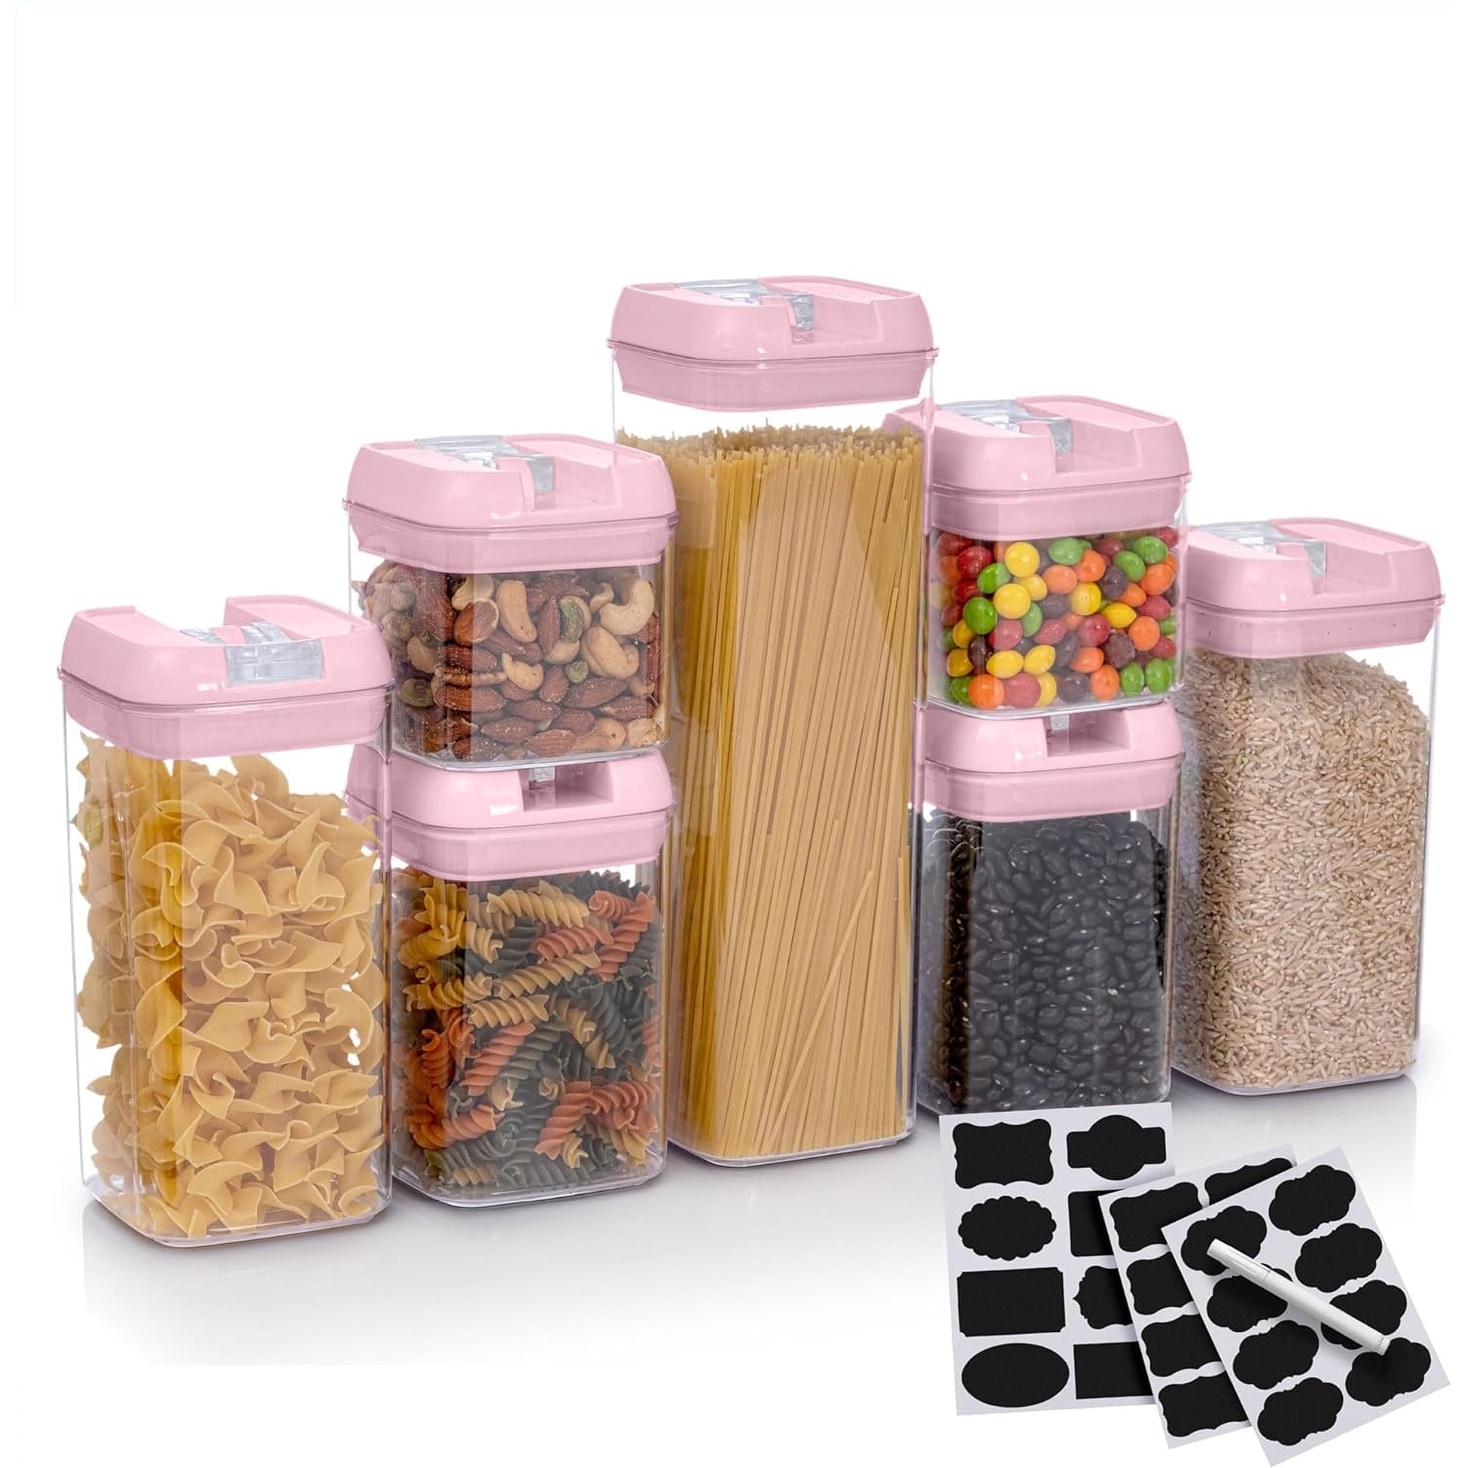 https://ak1.ostkcdn.com/images/products/is/images/direct/dd777f06e6442222f70eafed1cc8c06315132868/Cheer-Collection-7-piece-Stackable-Airtight-Food-Storage-Container-Set.jpg